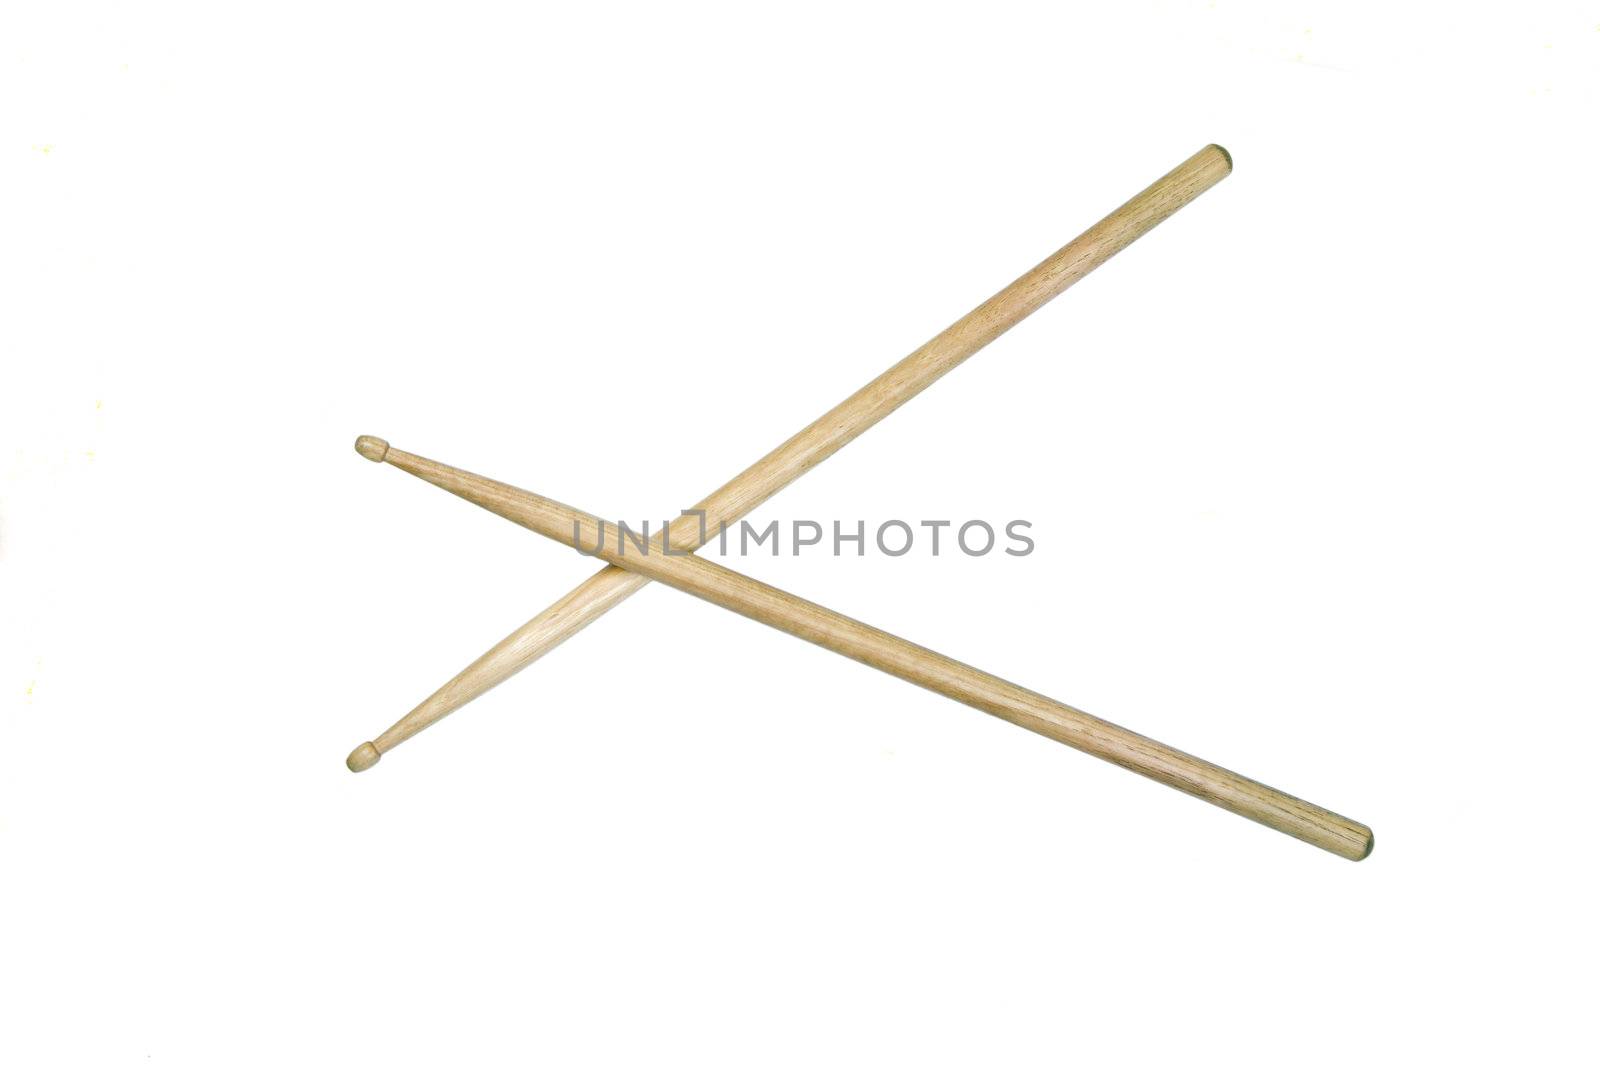 Two drumsticks crossed and isolated over white with clipping path